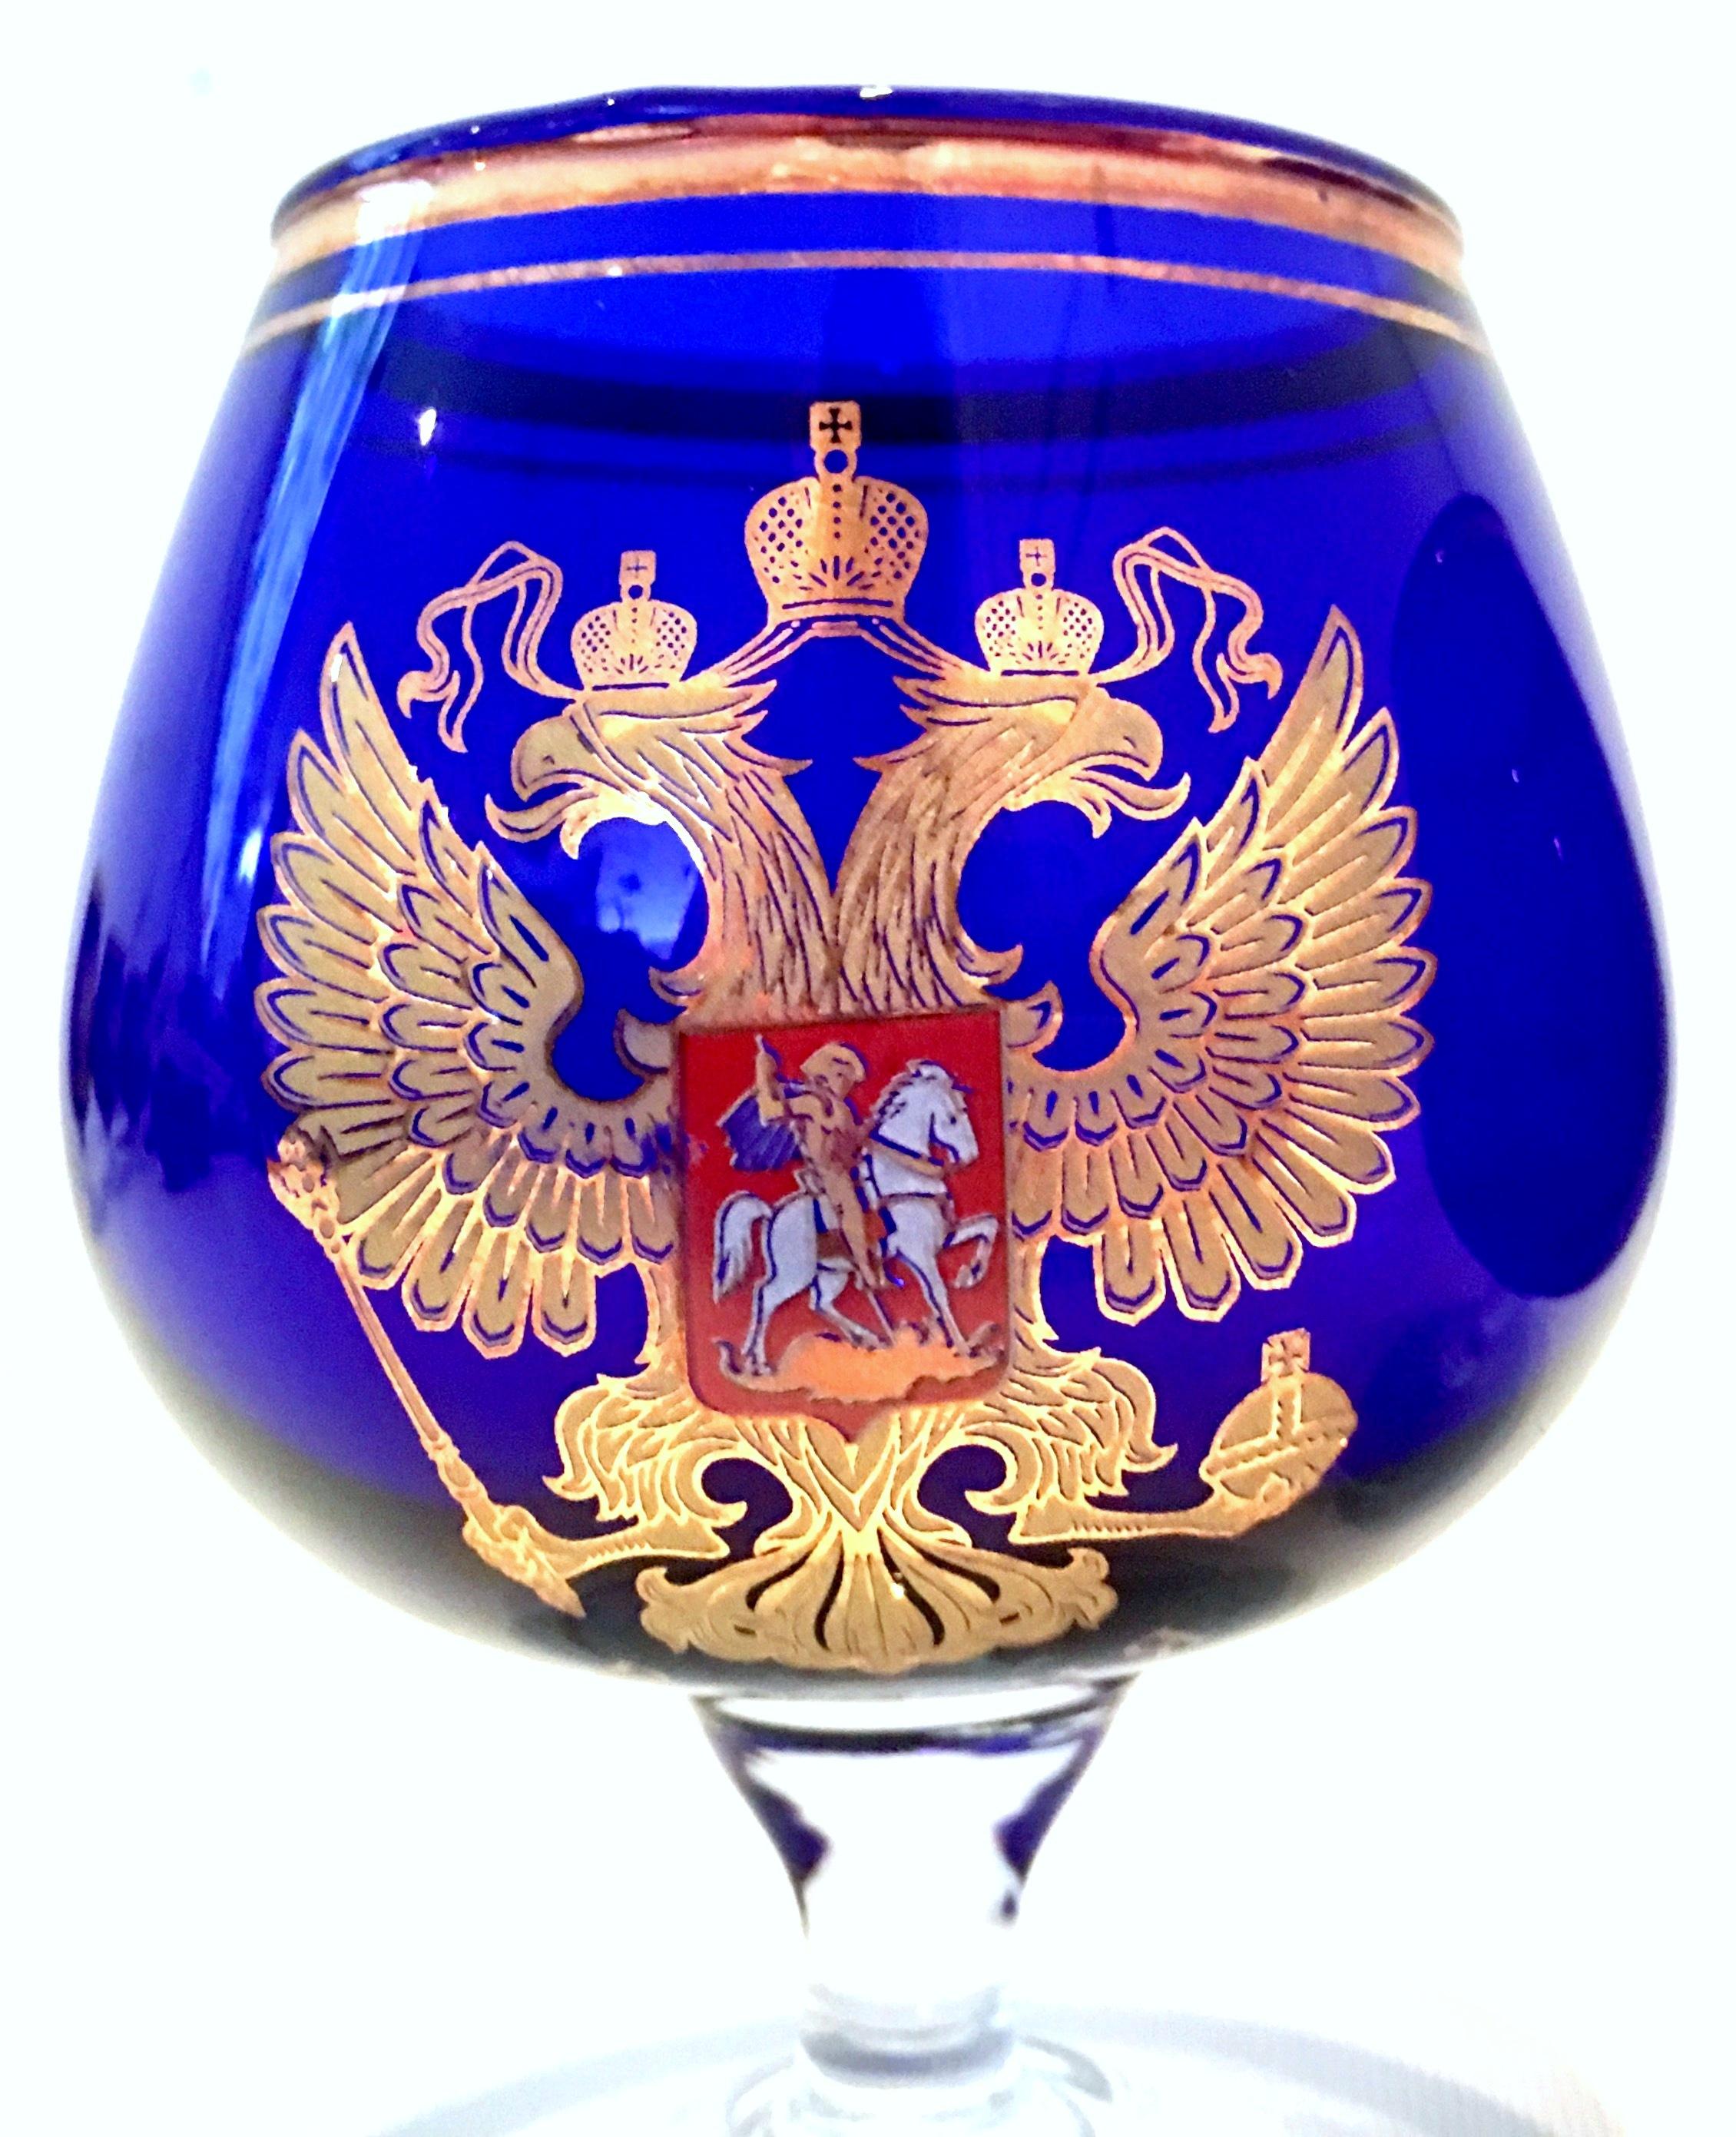 Mid-Century Cobalt & 22K Gold Coat of Arms Bohemia Glass Drinks Set of 11 2